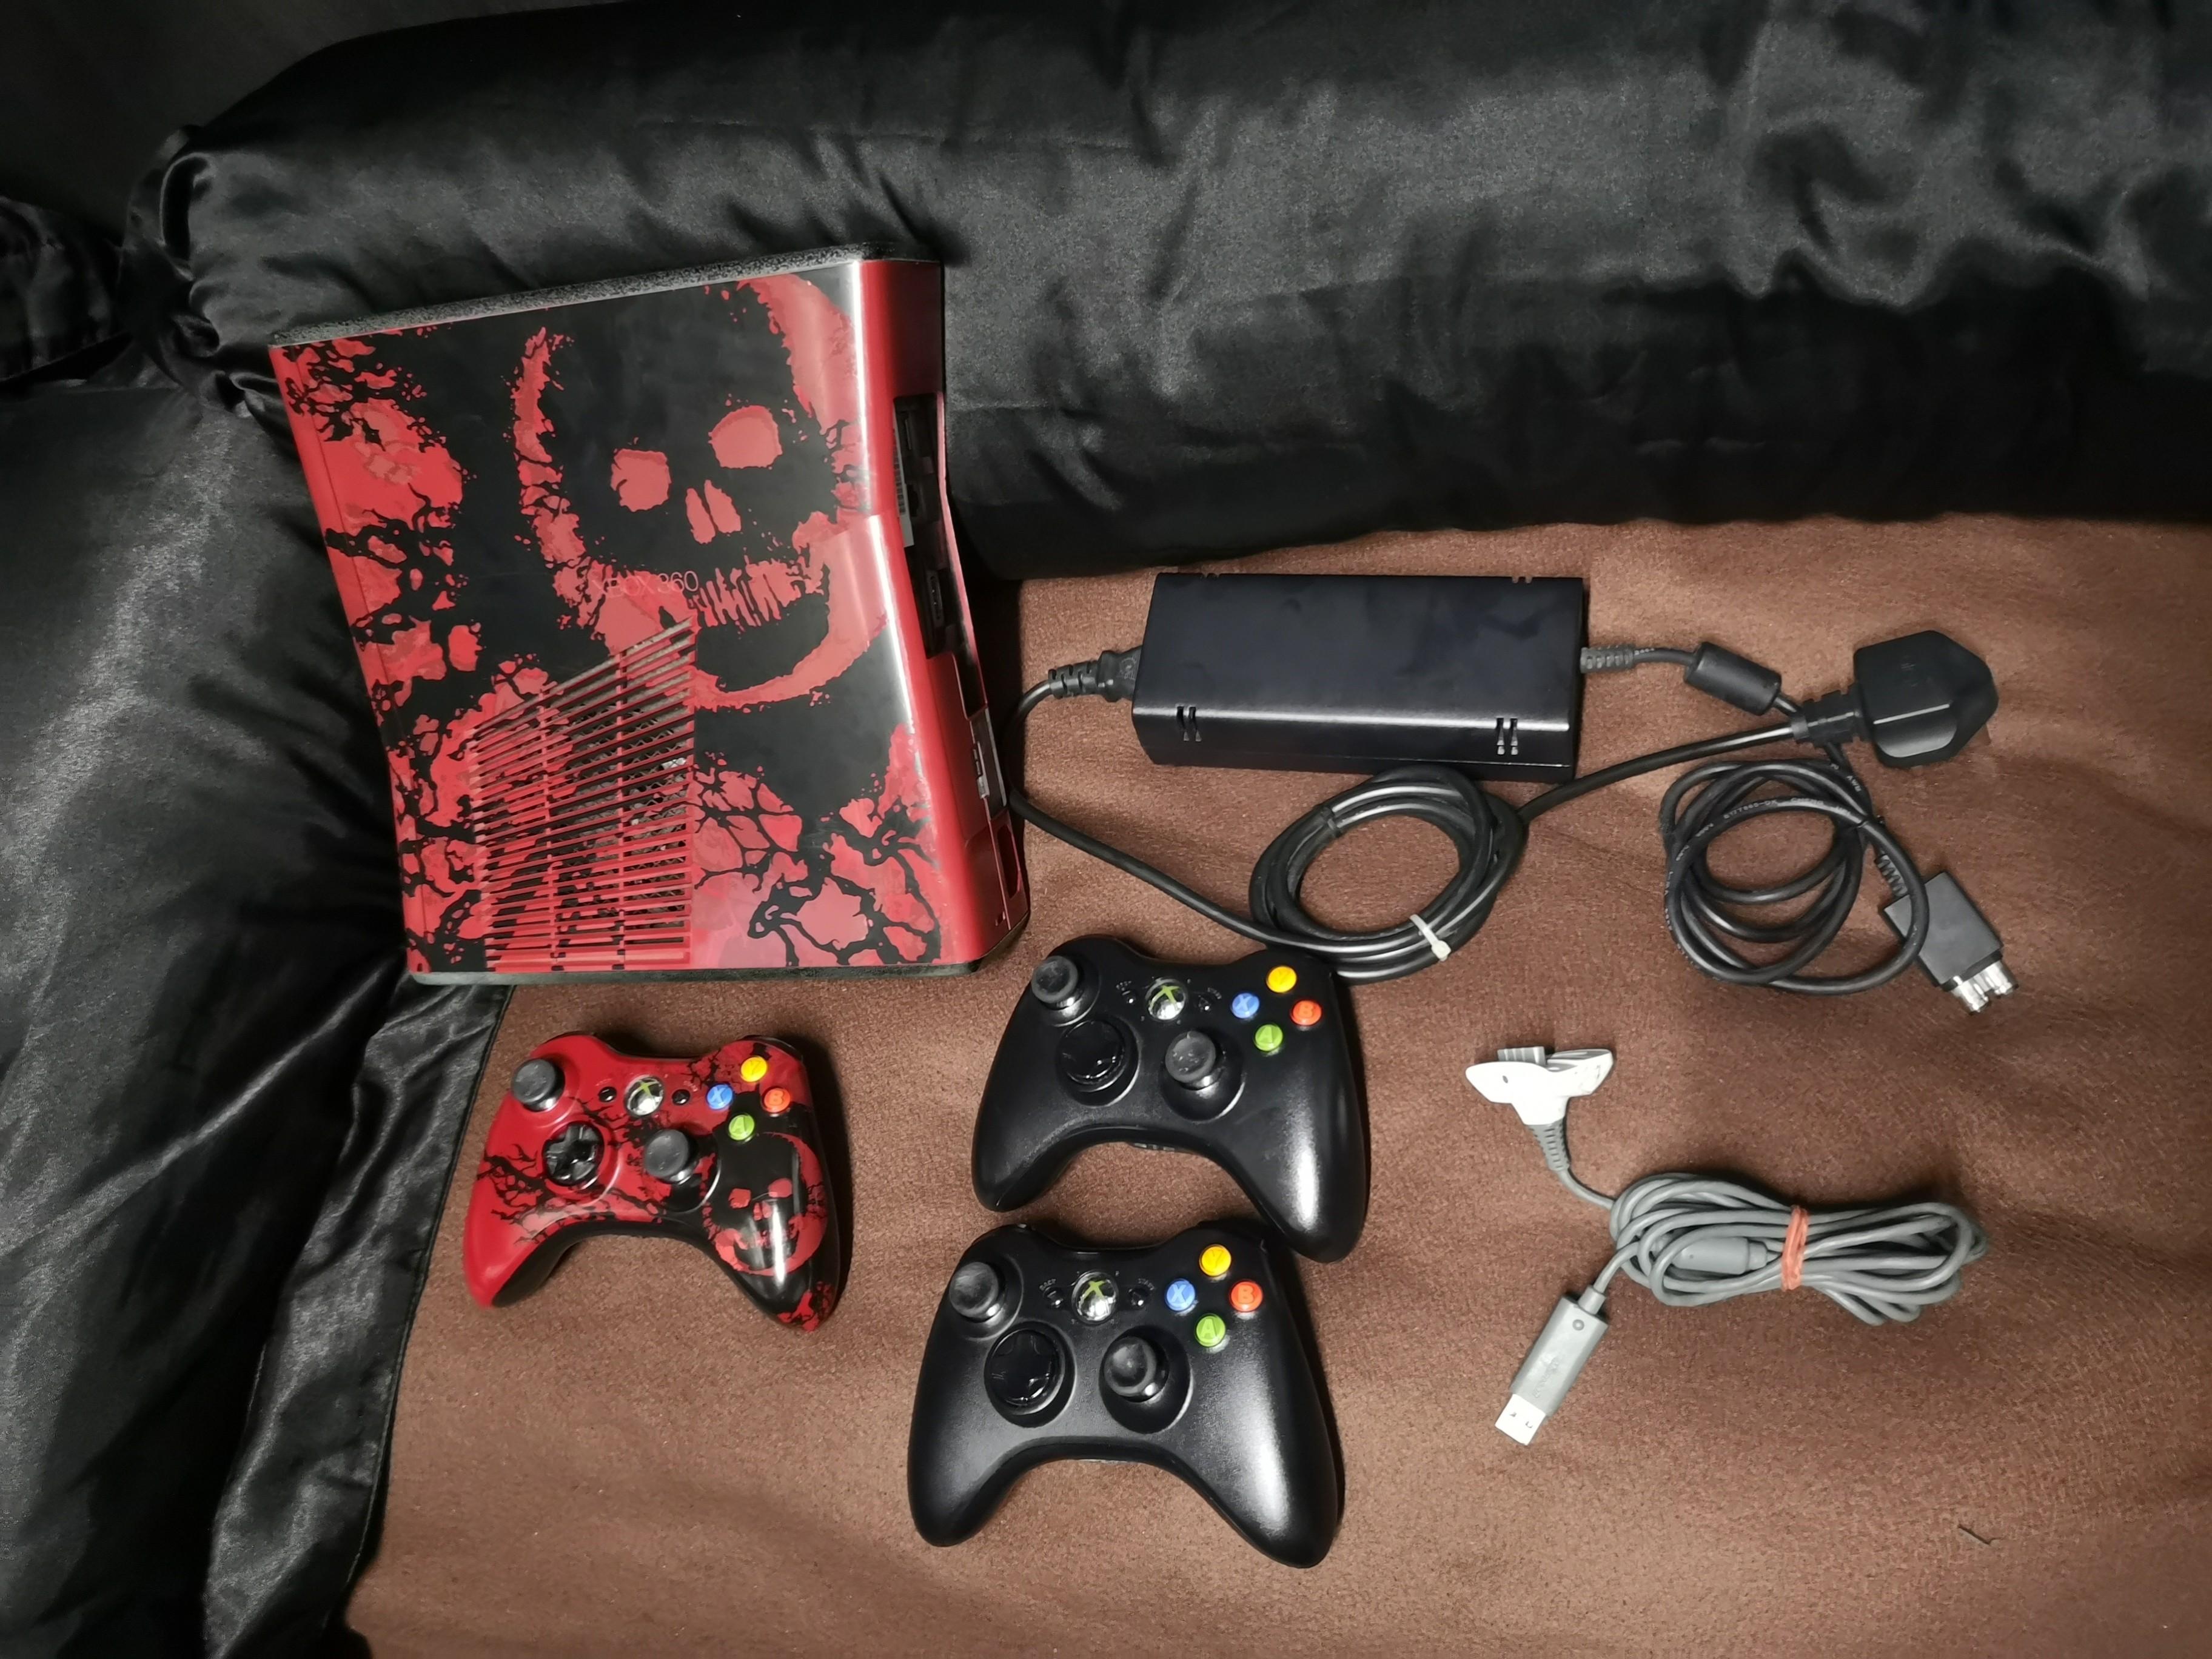 Consola Xbox 360 4 GB Gears of War Judgment